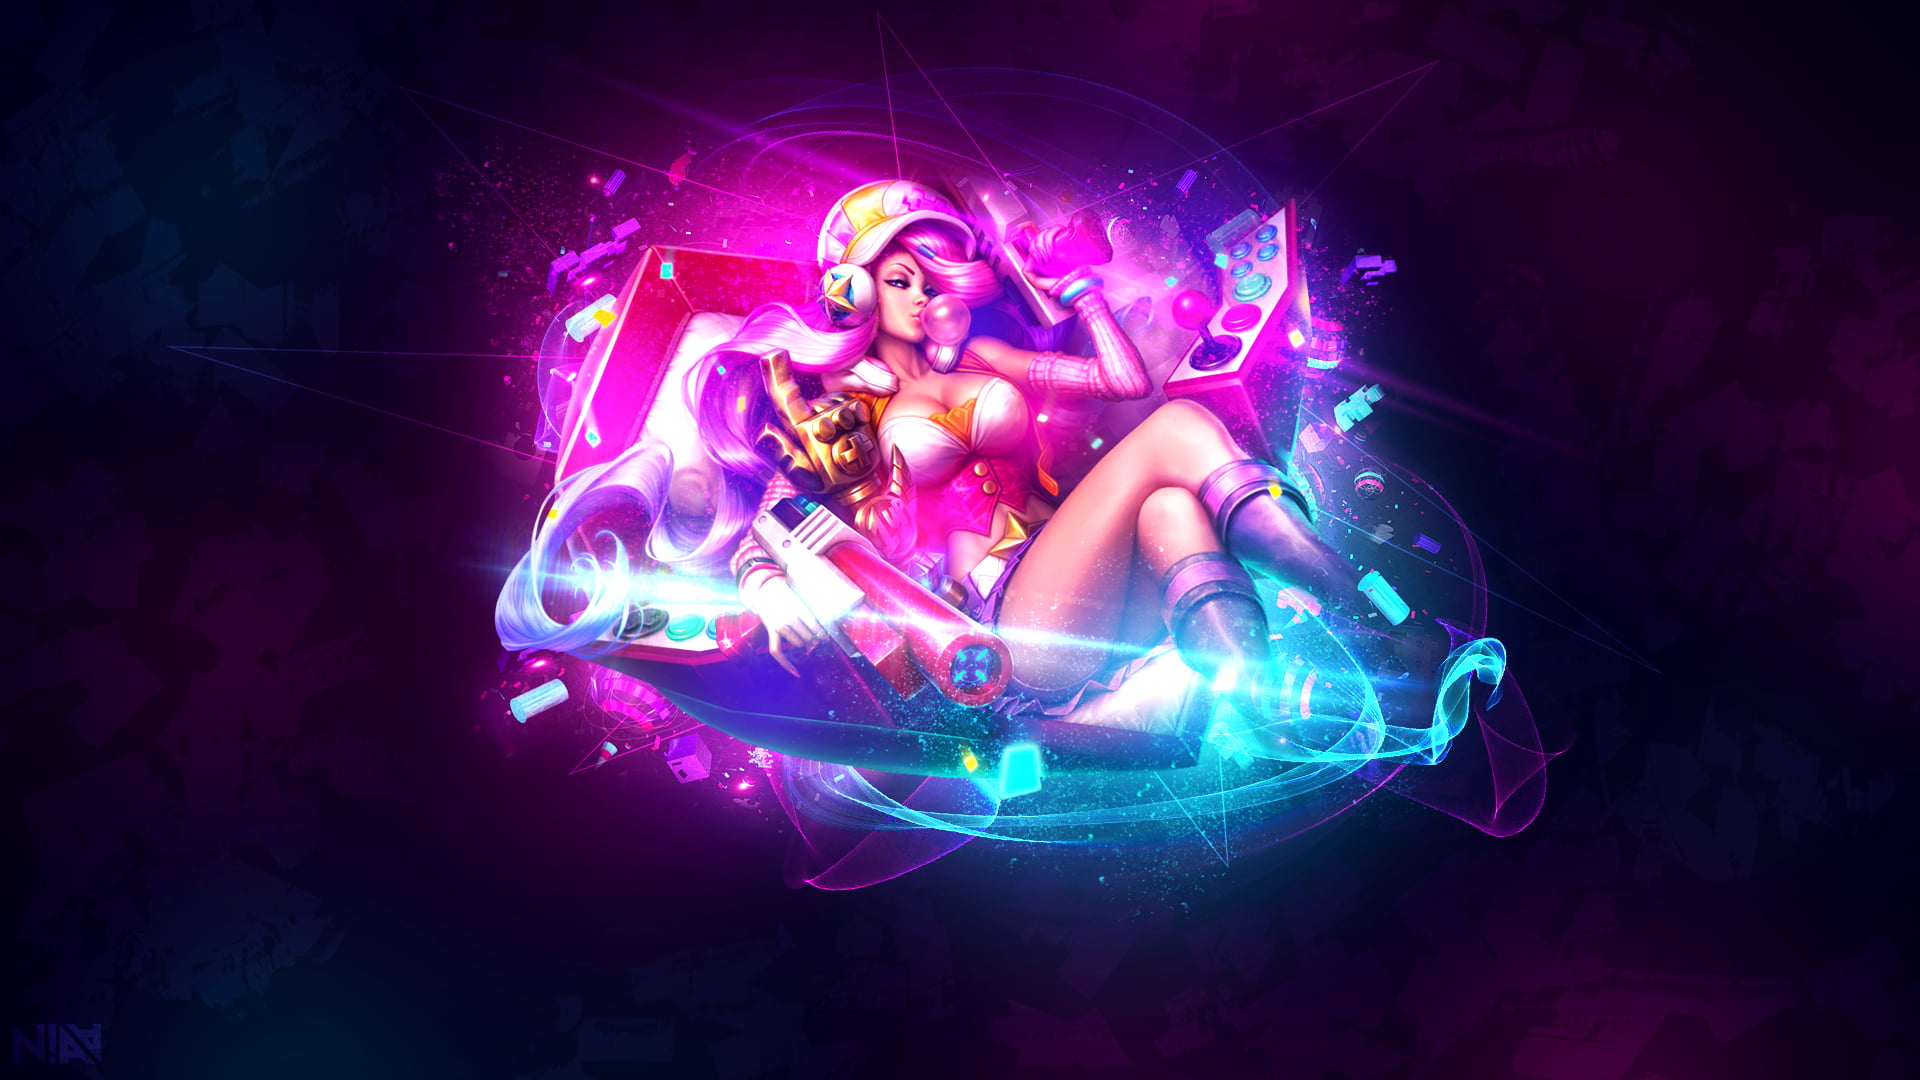 Pink Haired Female Anime Character Wallpaper League Of Legends Images, Photos, Reviews